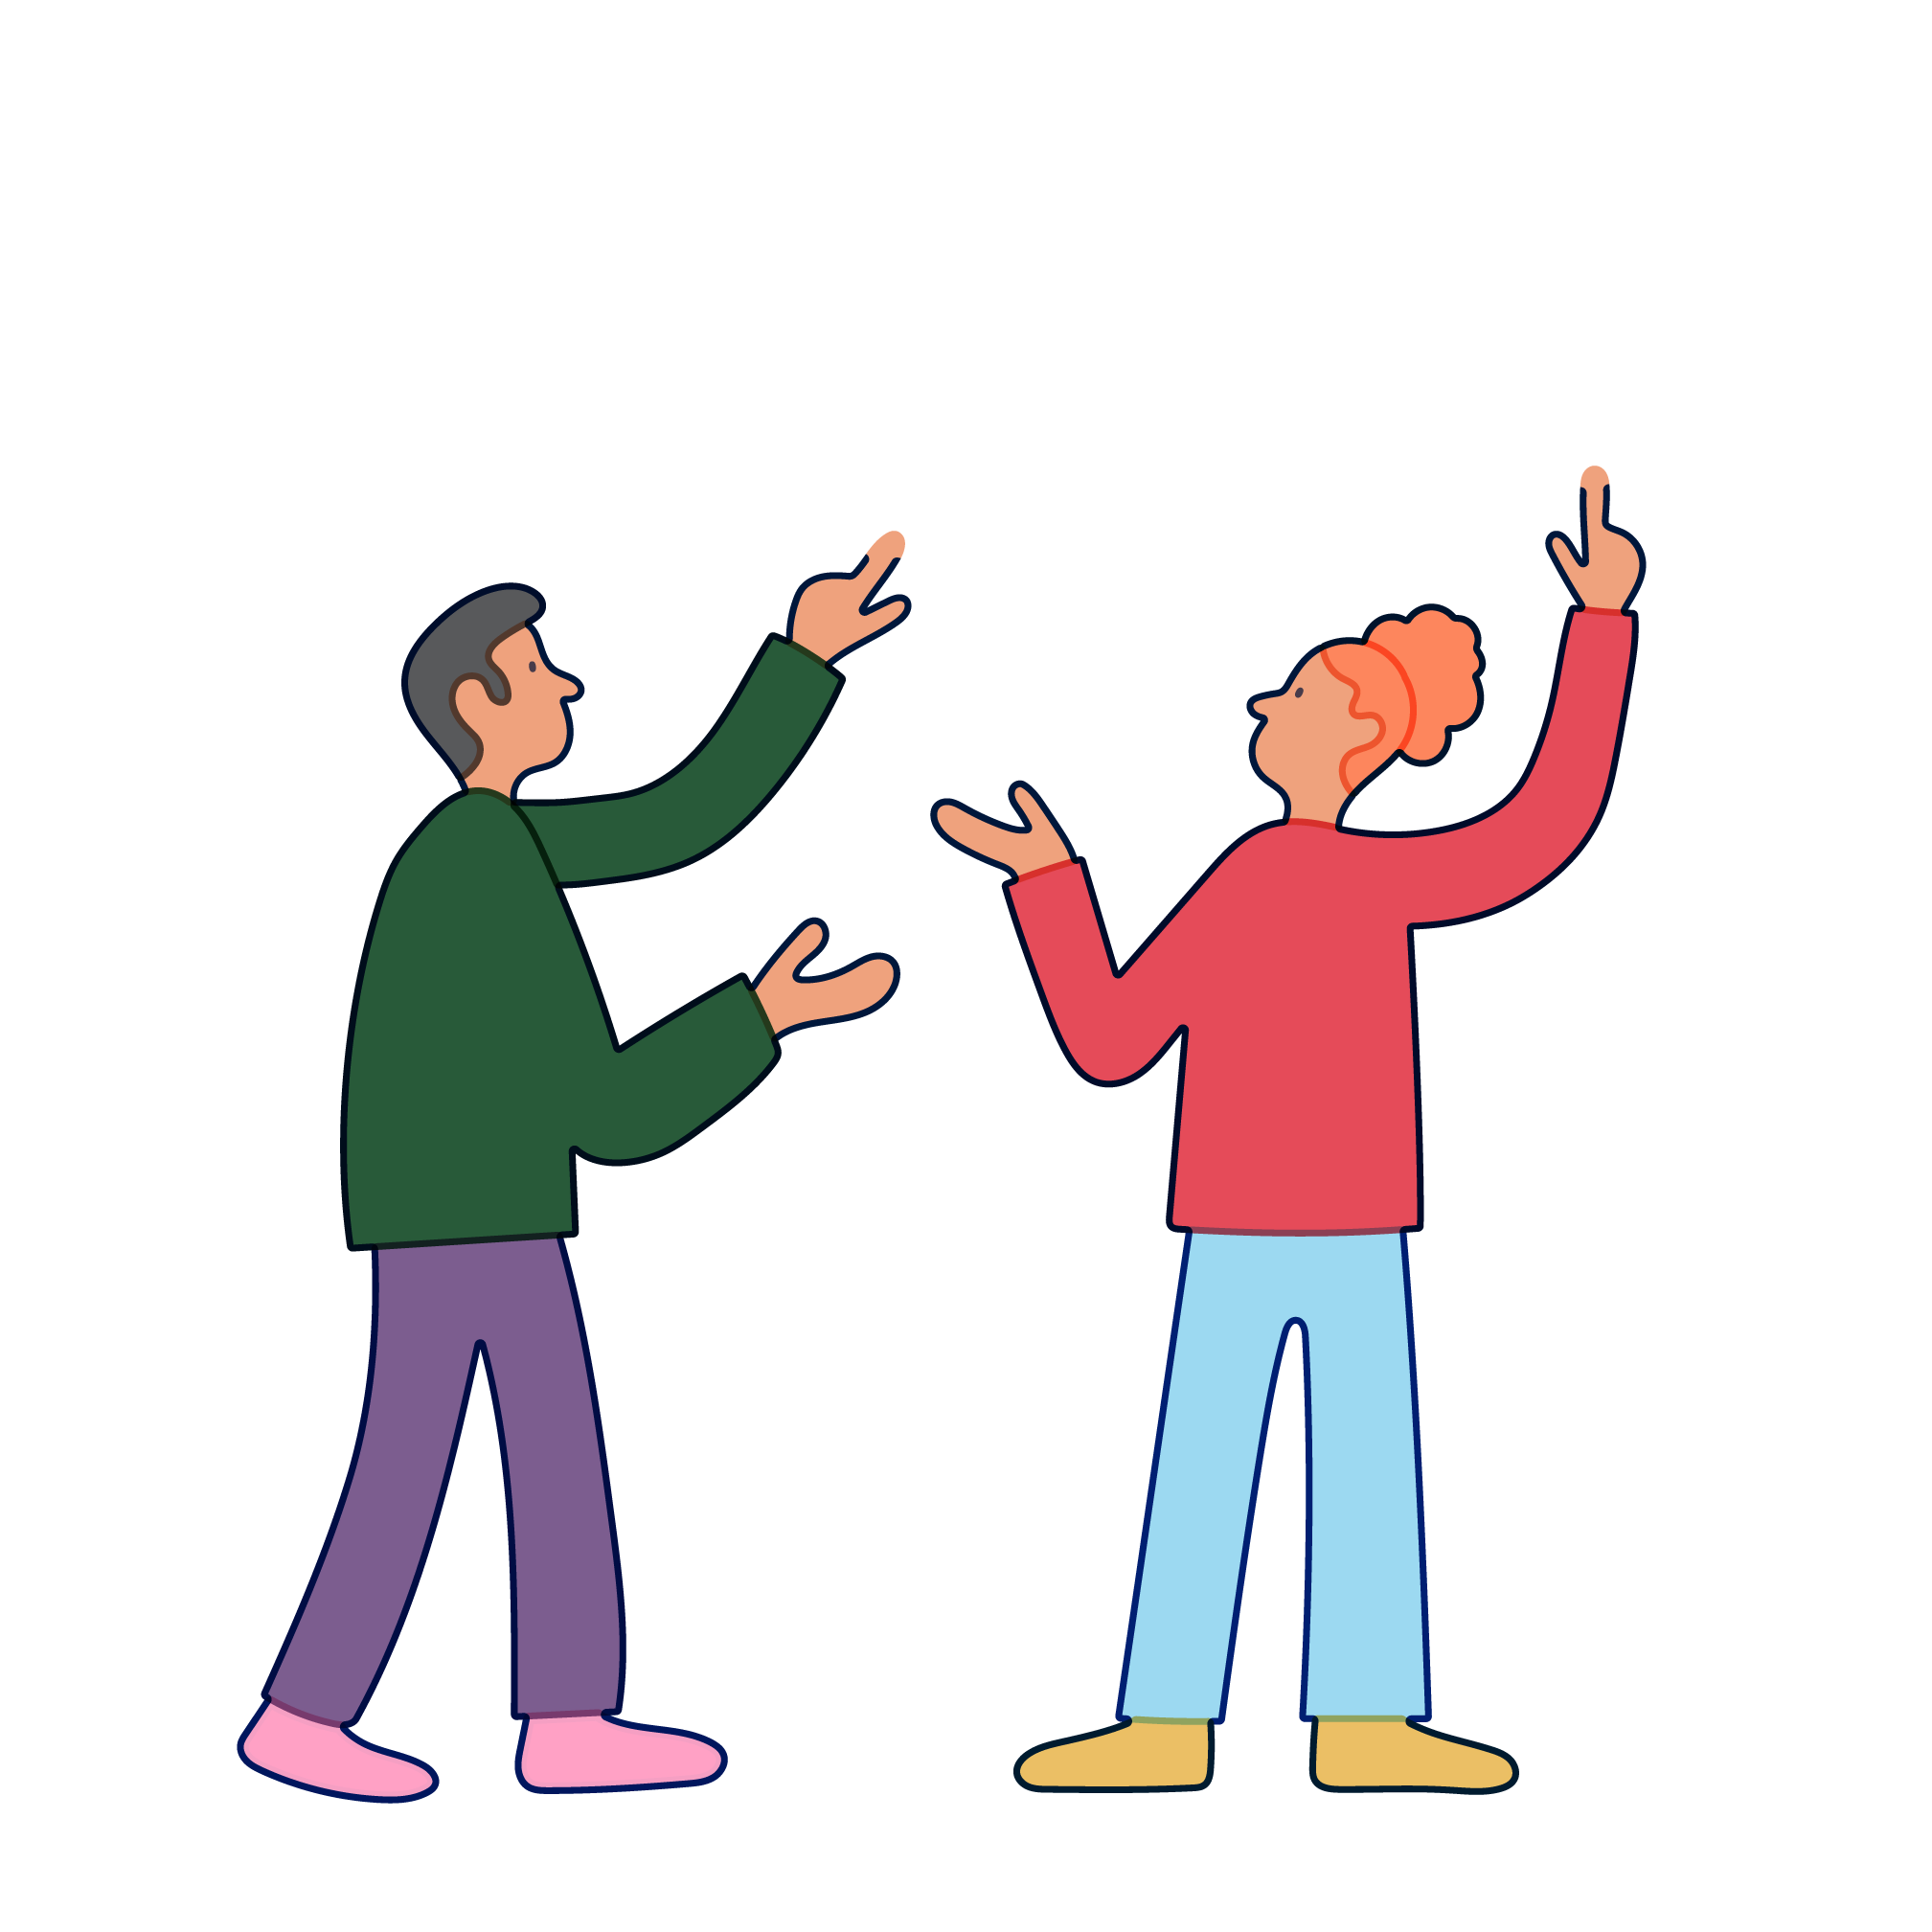 Two people chat animatedly with empty speech bubbles above them.